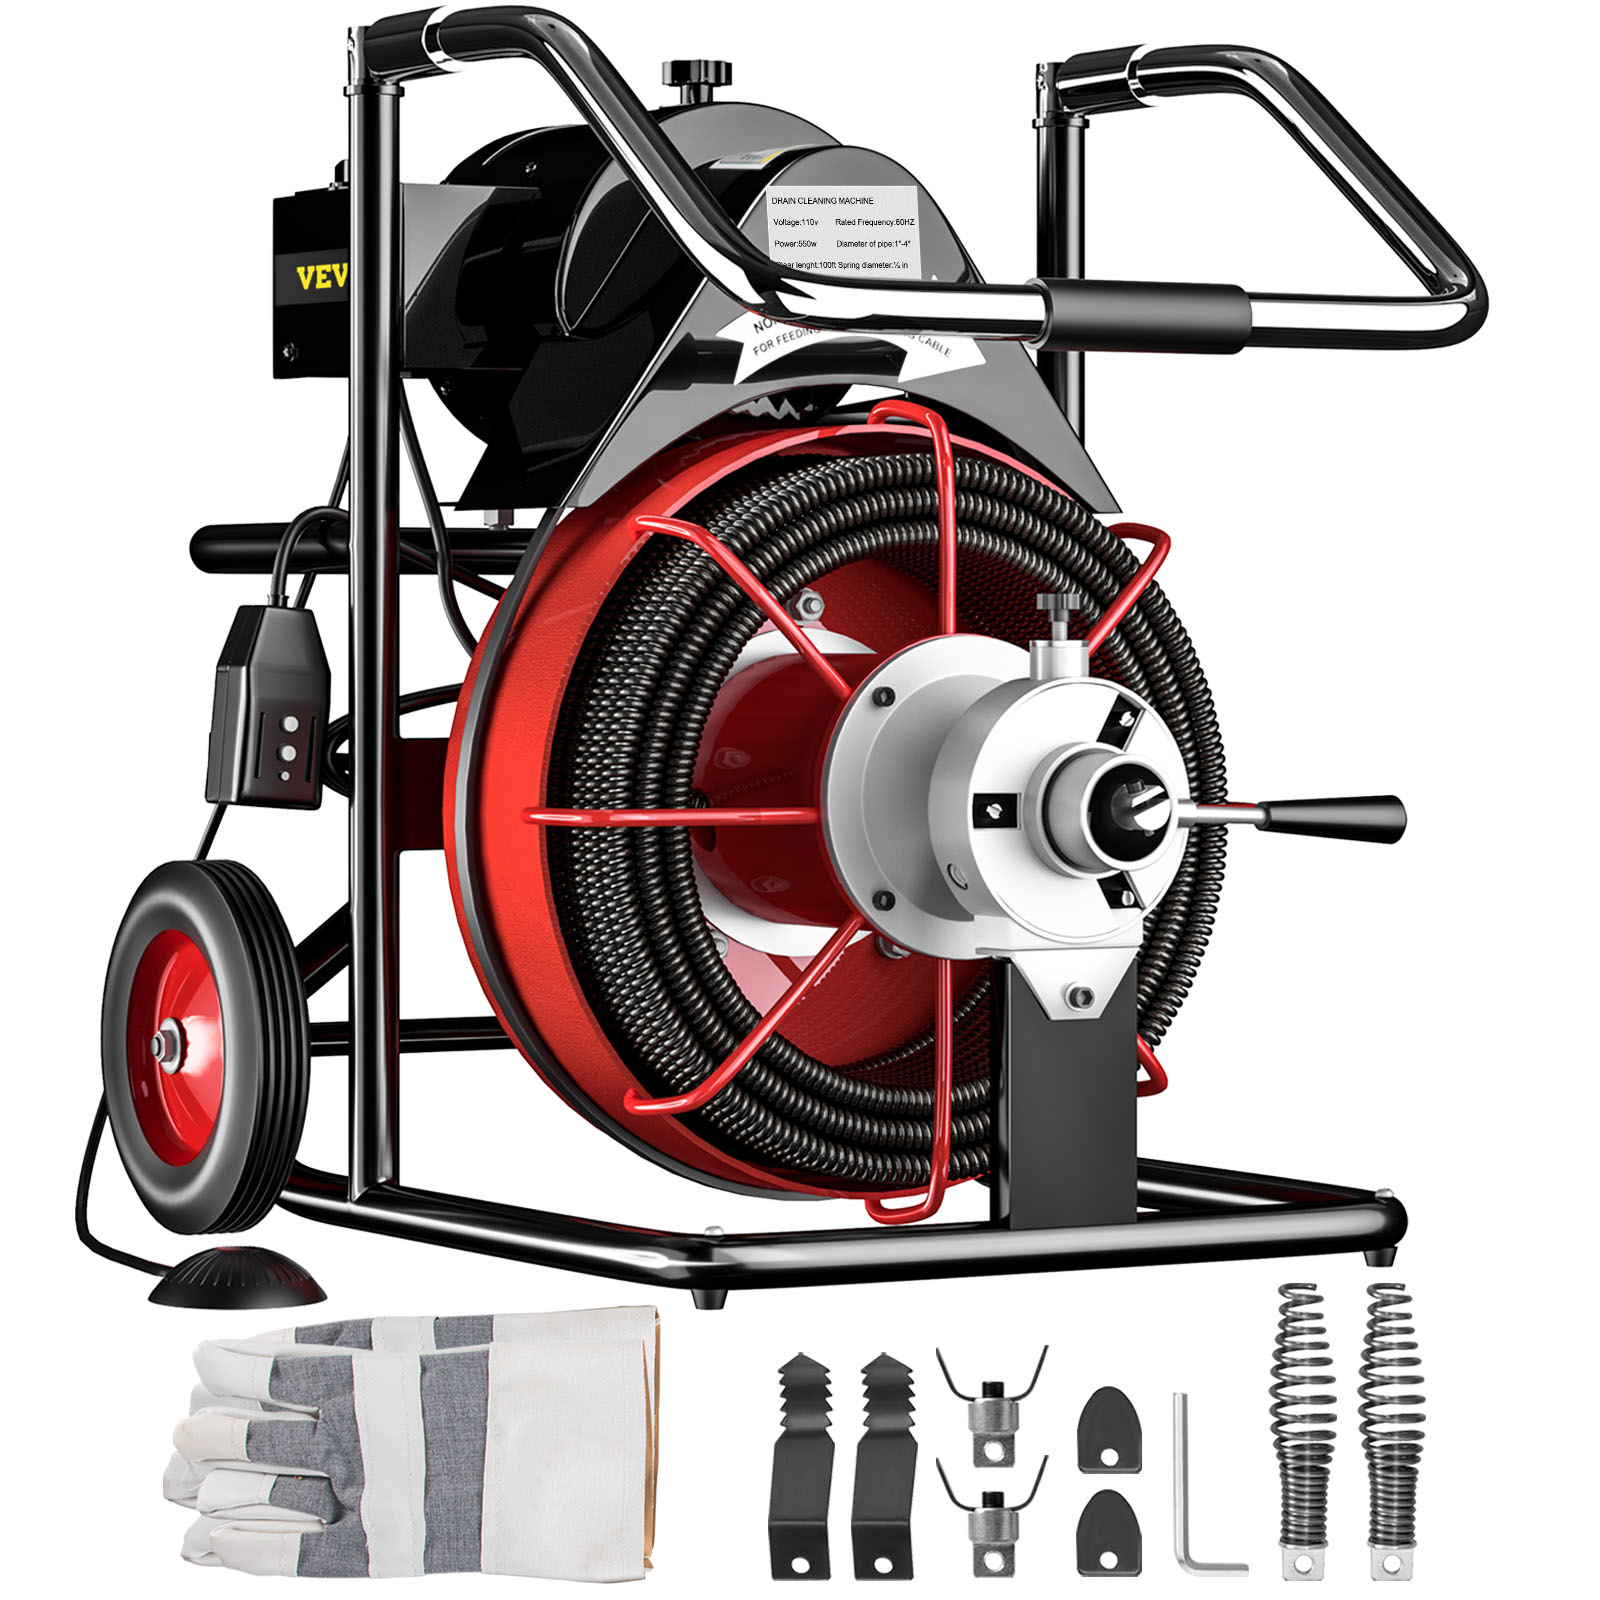 VEVORbrand Drain Cleaner Machine 100 ft x 1/2 in Drain Cleaning Machines 550W Electric Drain Auger 1700 r/min for 2" to 4" Pipes Electric Drain Snake Sewer Snake Drill - image 1 of 9